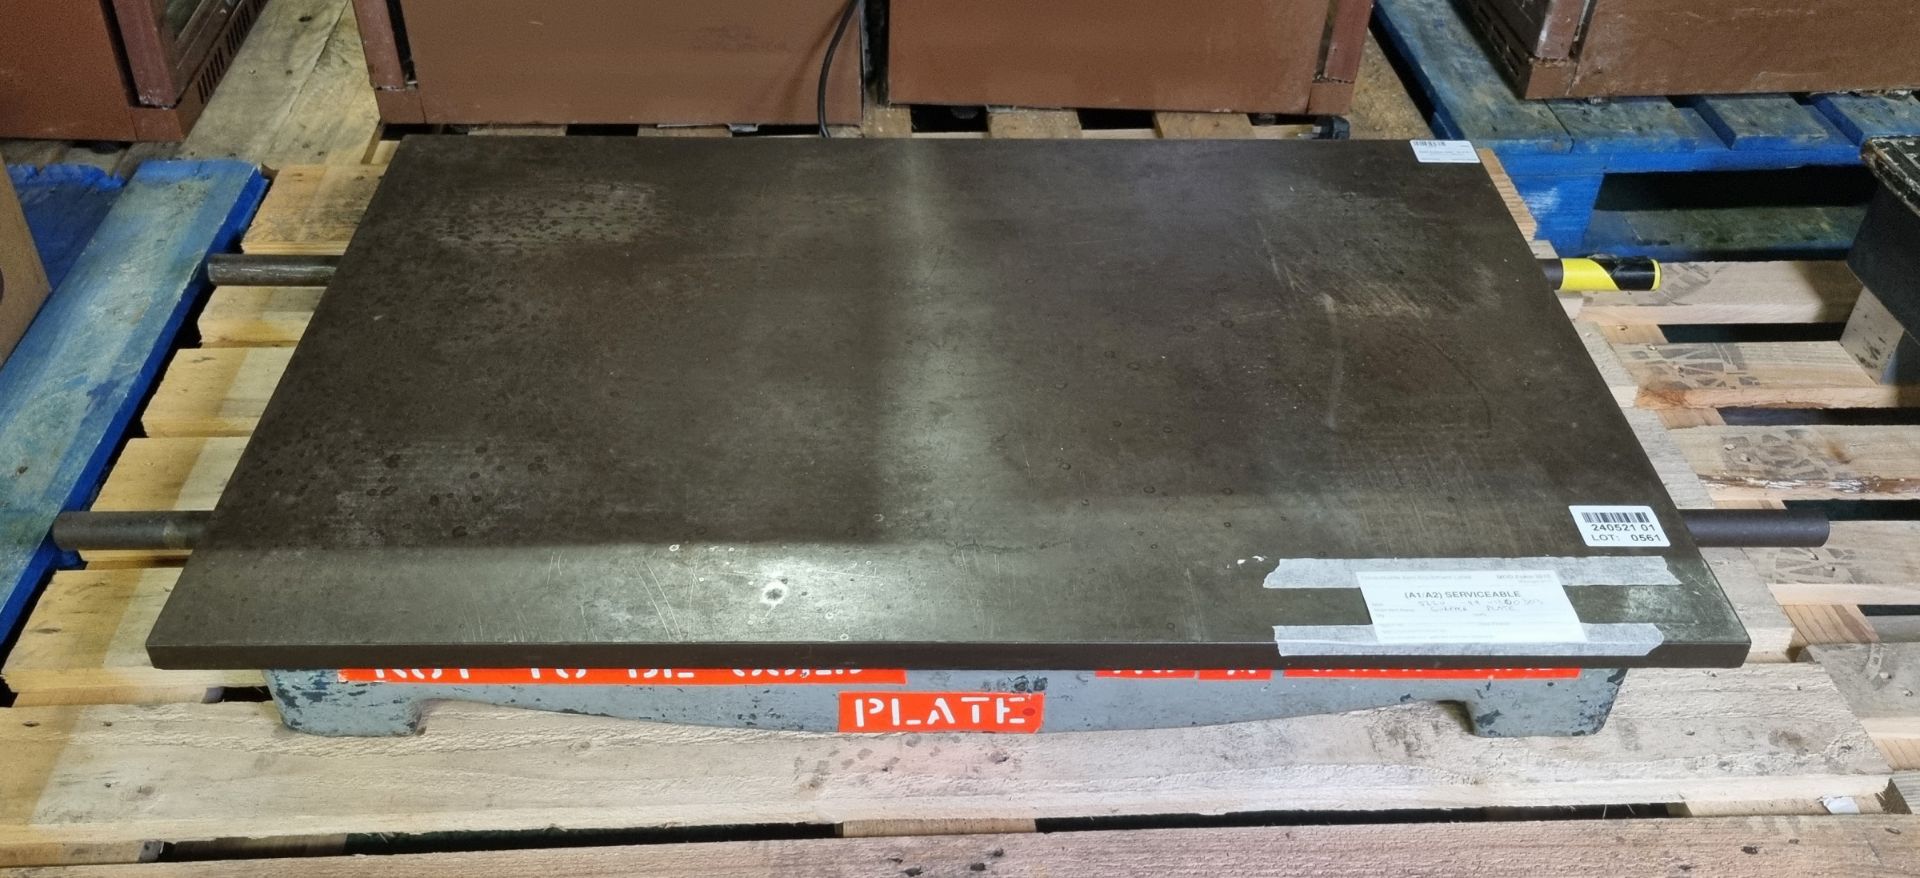 Steel surface plate - W 915 x D 610 x H 130mm - Image 2 of 4